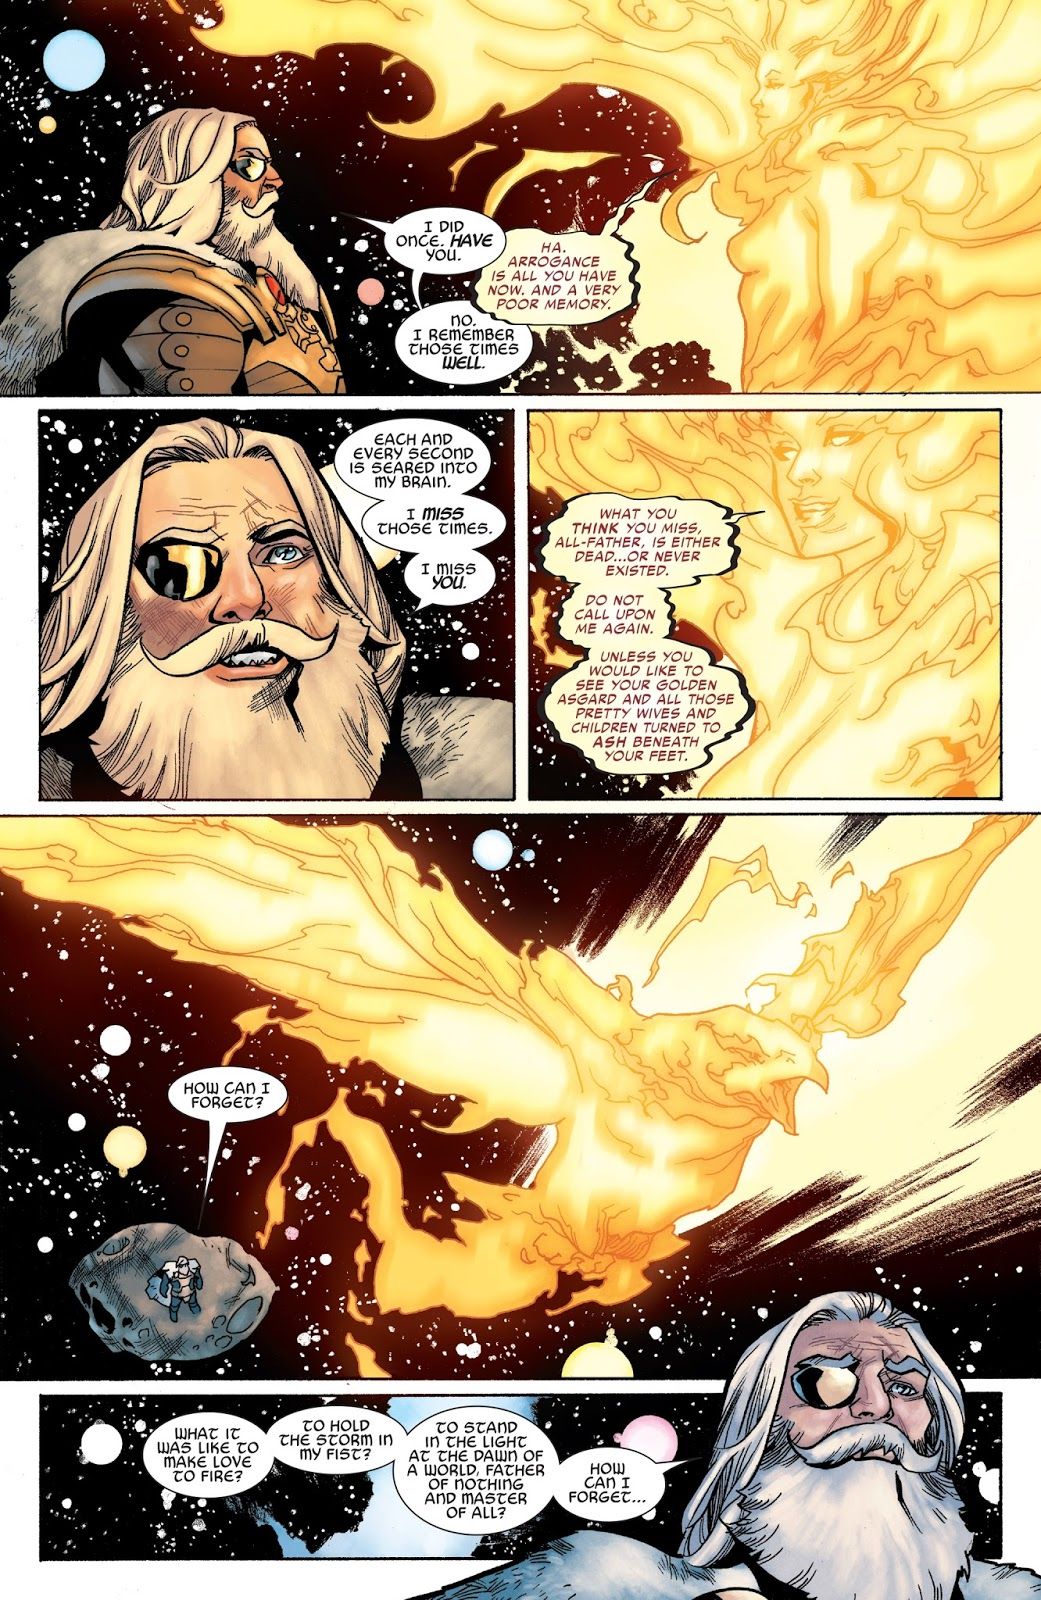 Odin reveals a past love affair with the Phoenix Force